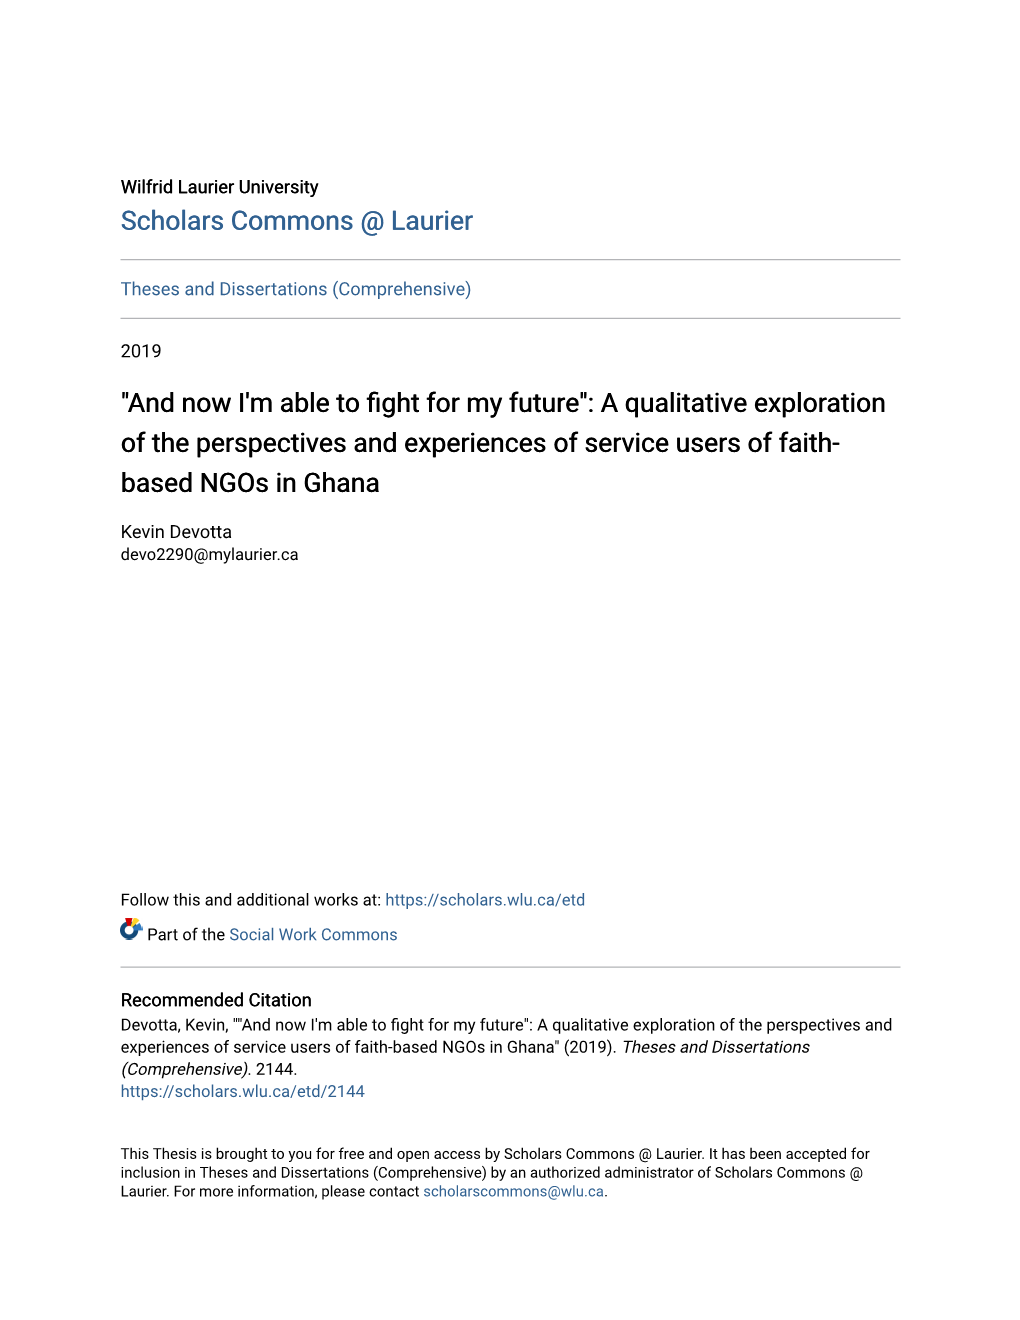 "And Now I'm Able to Fight for My Future": a Qualitative Exploration of the Perspectives and Experiences of Service Users of Faith- Based Ngos in Ghana